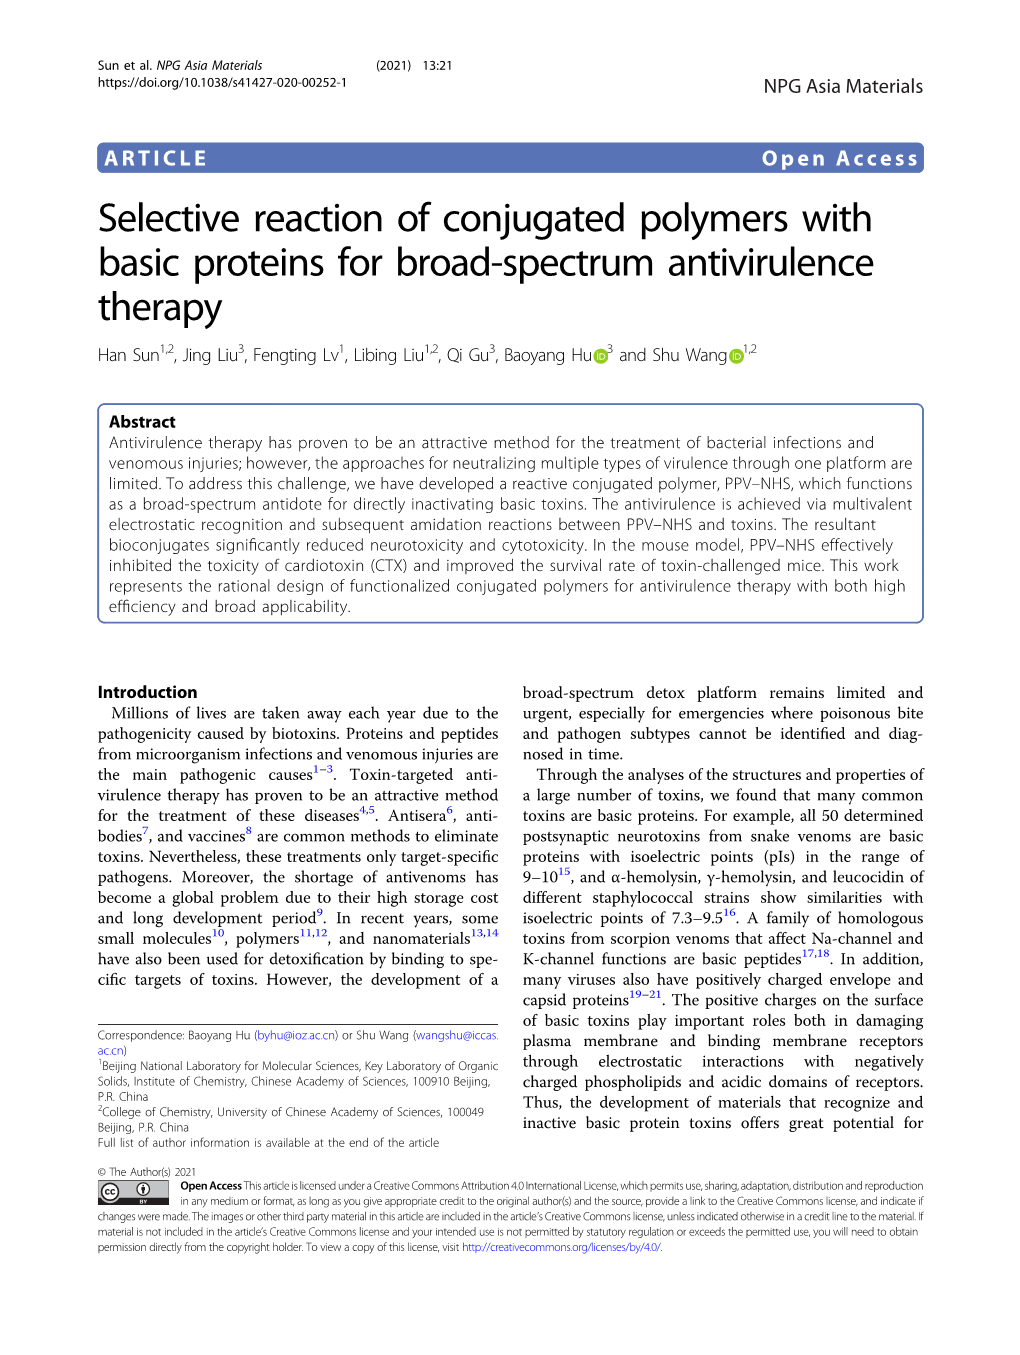 Selective Reaction of Conjugated Polymers with Basic Proteins For